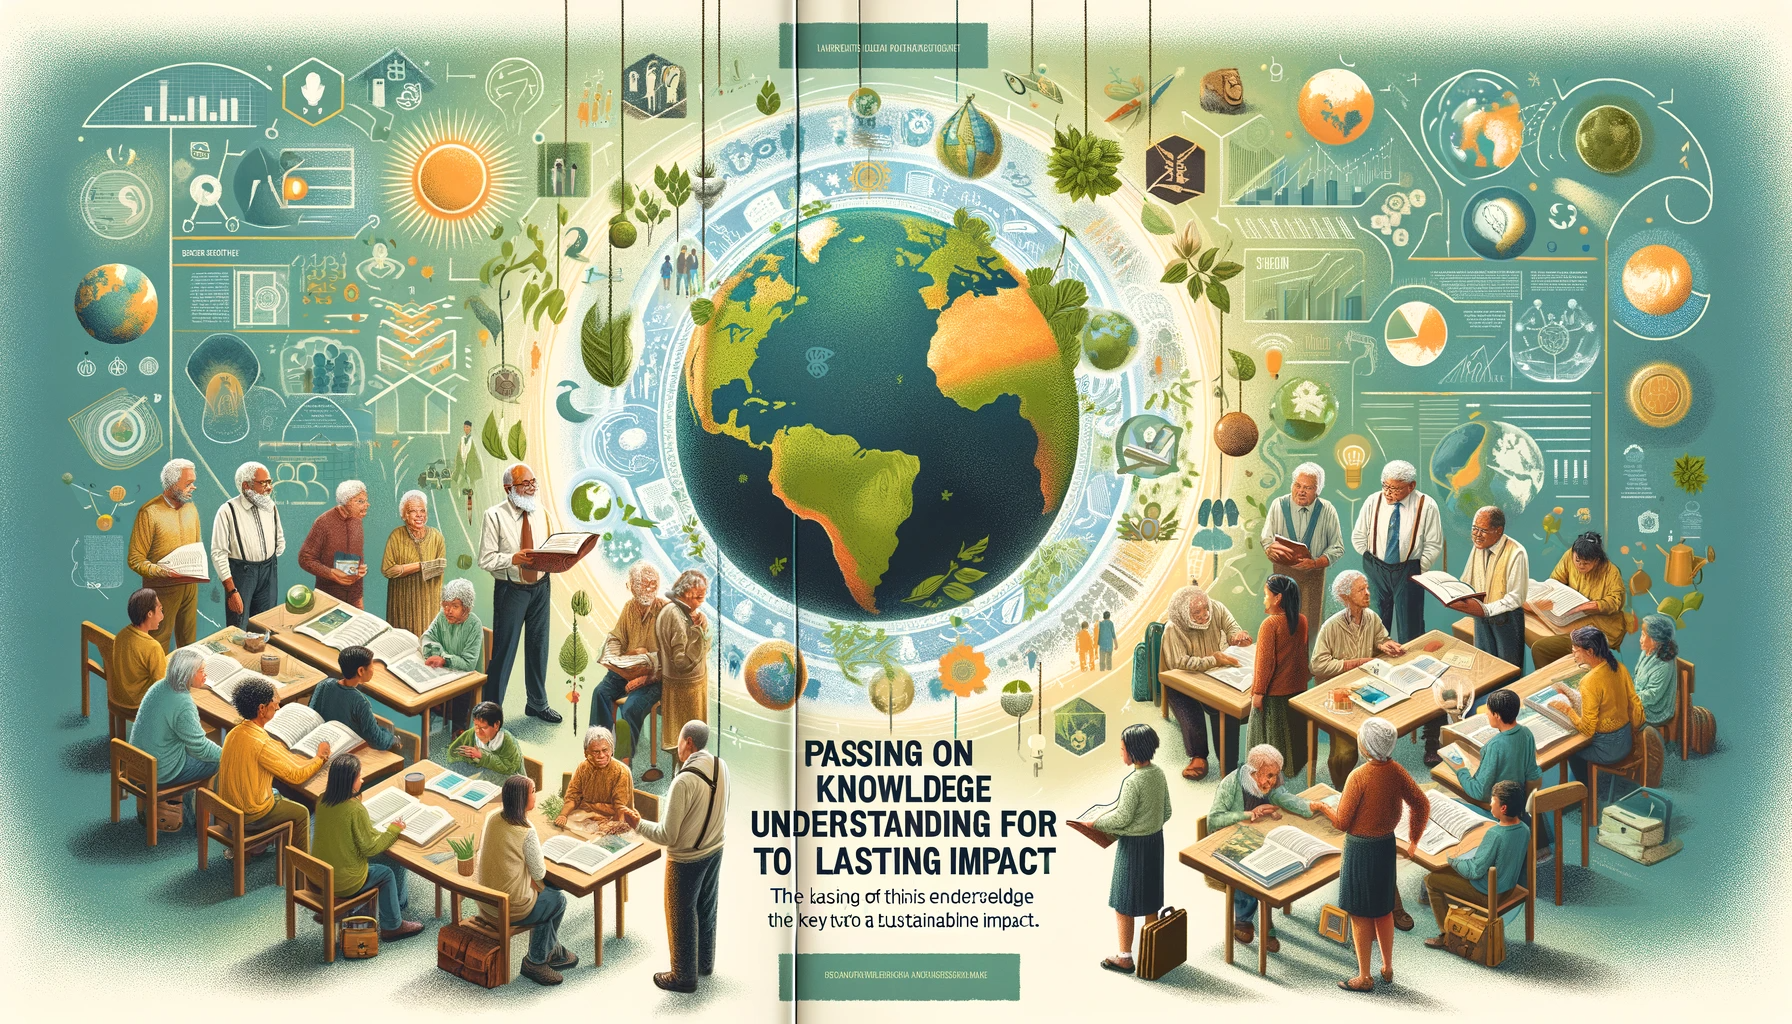 Passing on Knowledge Understanding for Sustainable Knowledge: The Key to…